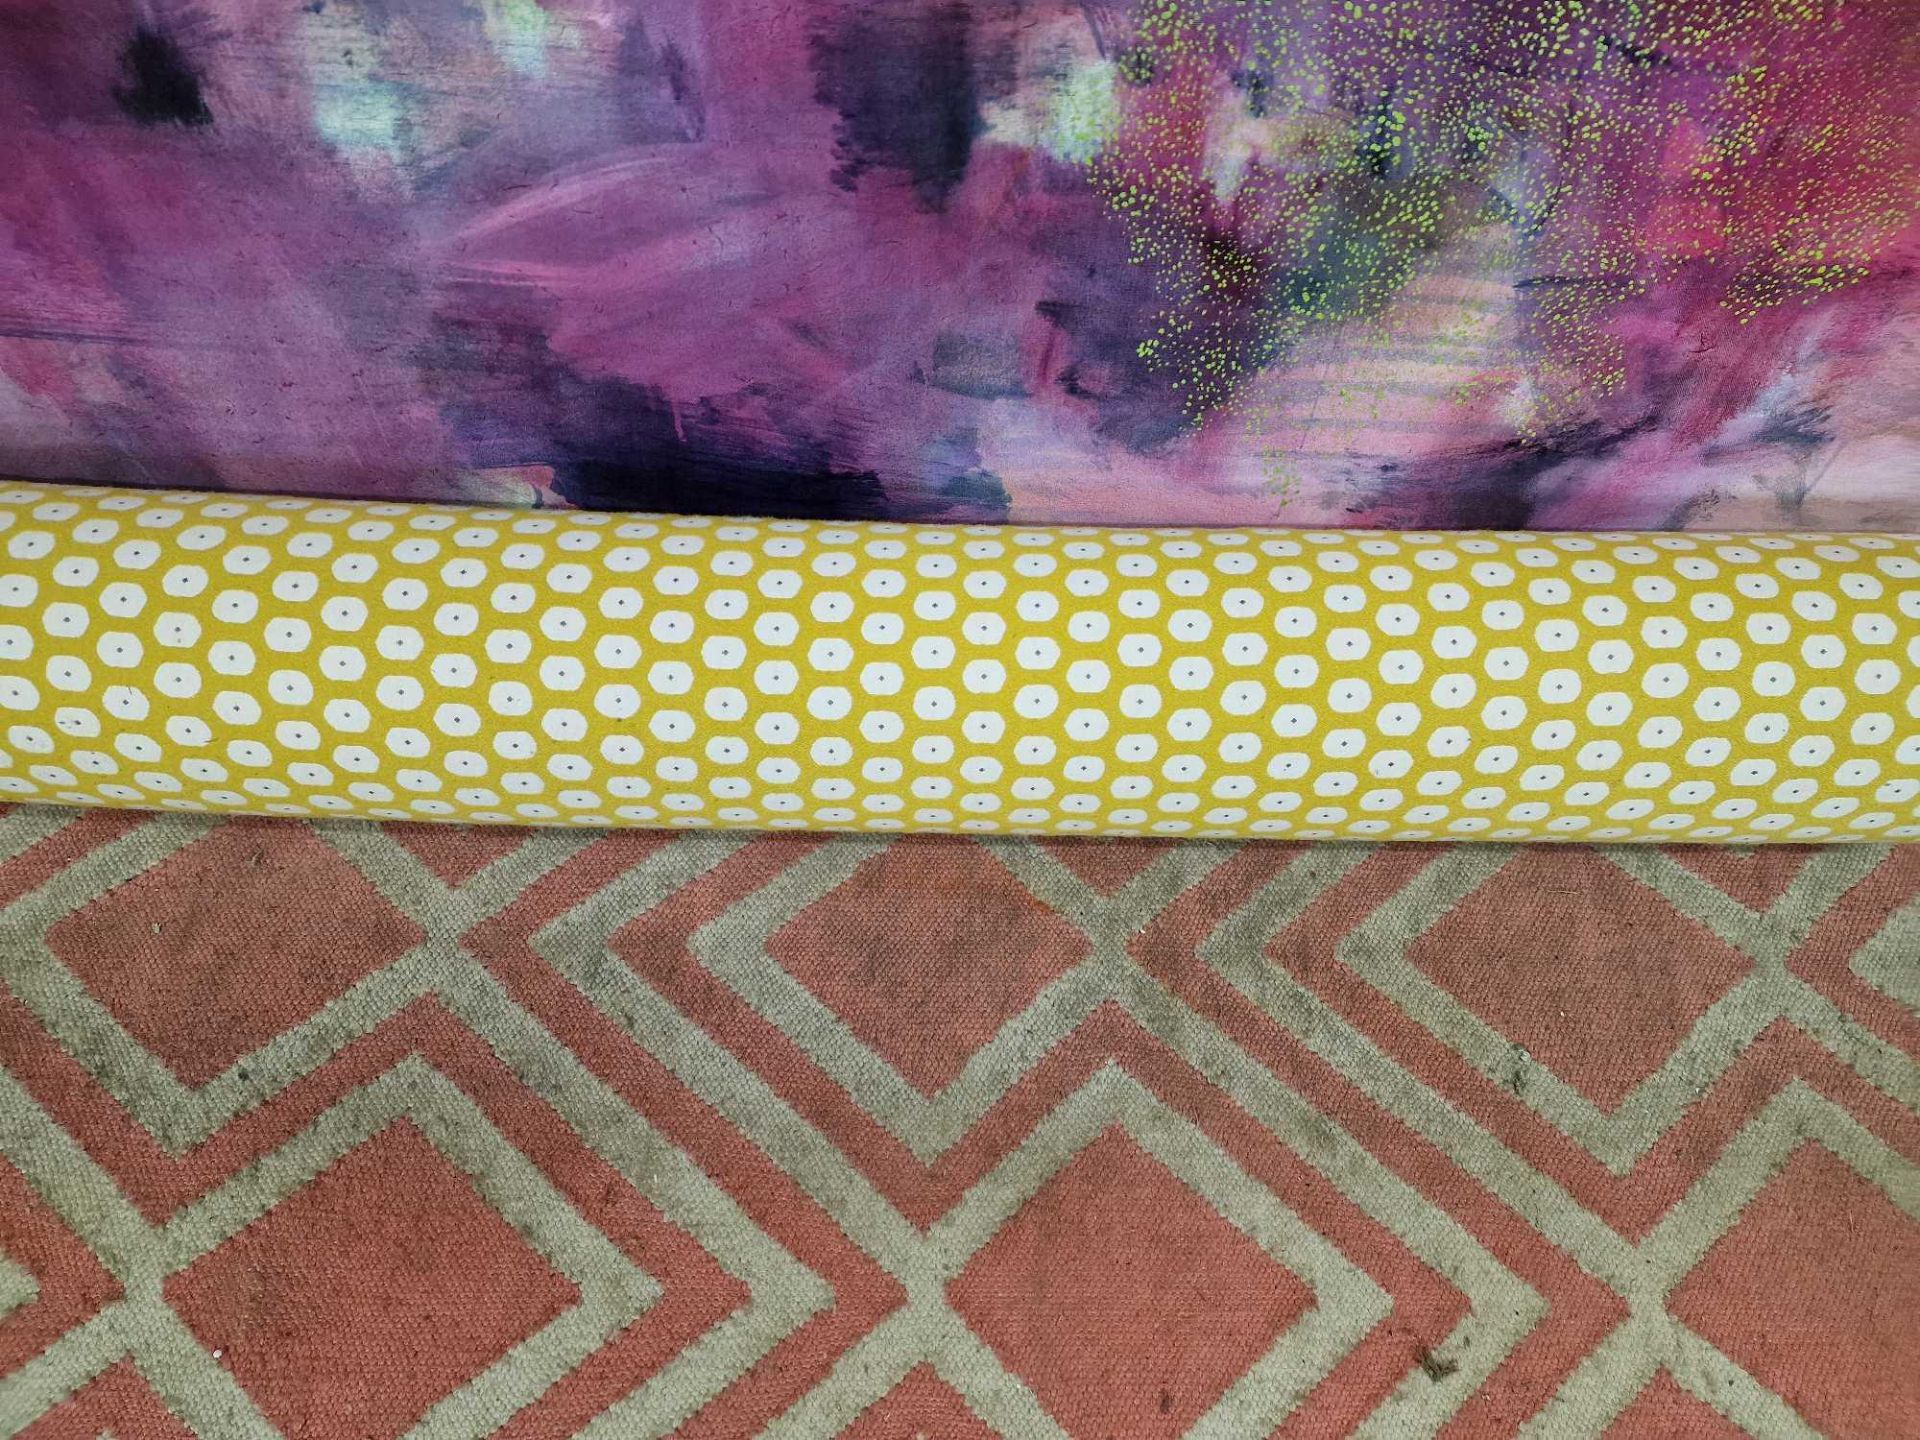 7 x yellow and white patterned upholstered bolster cushions 60cm - Image 2 of 2